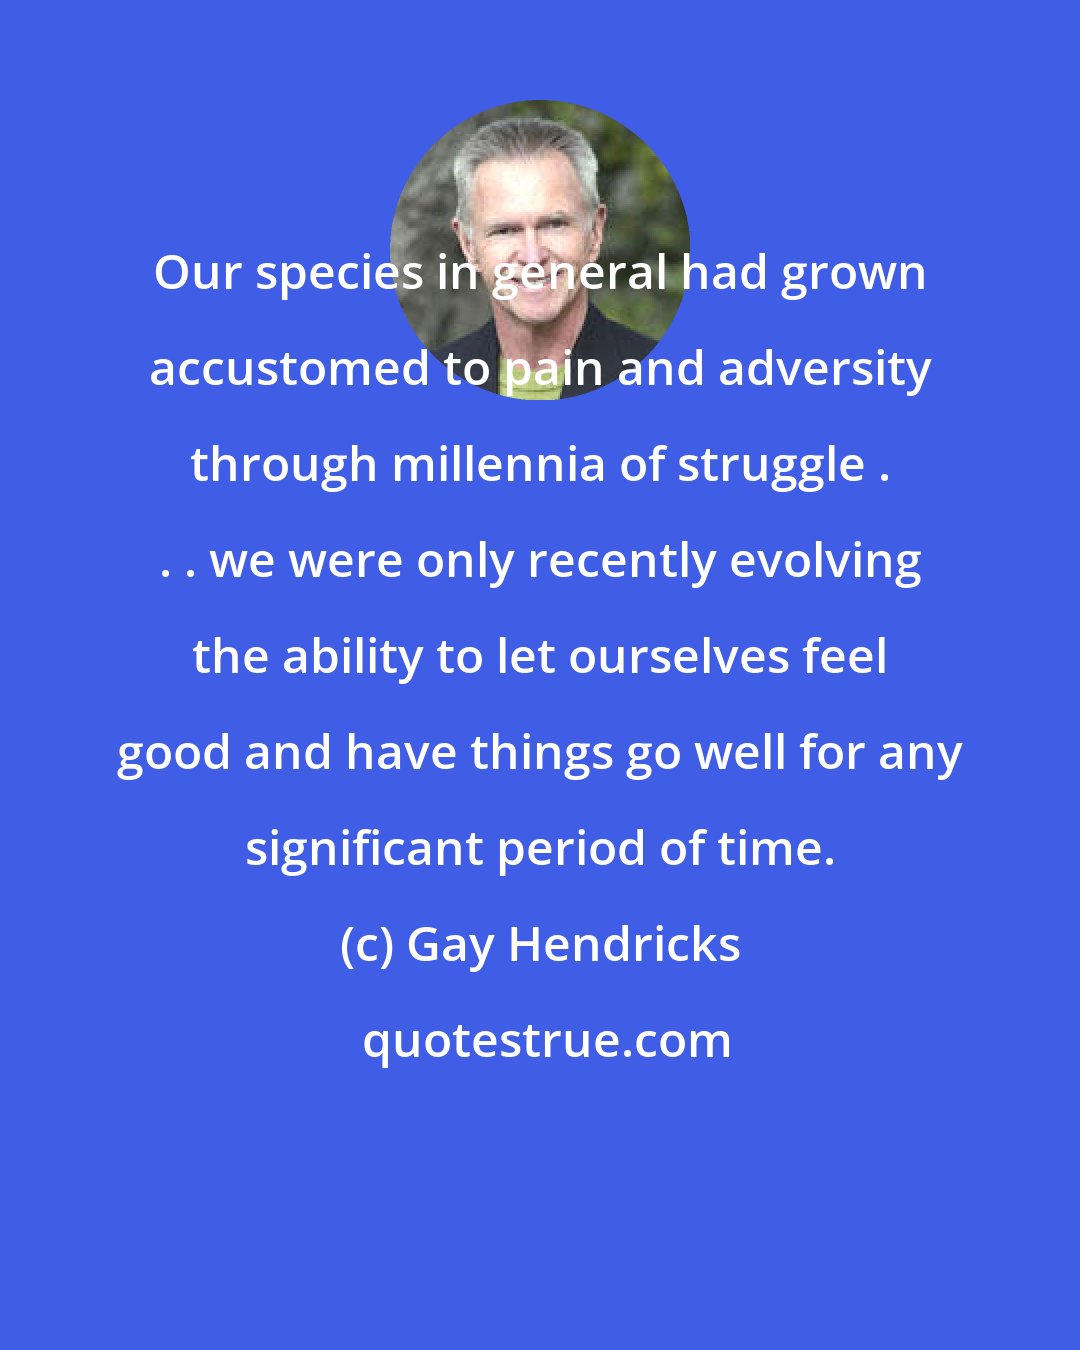 Gay Hendricks: Our species in general had grown accustomed to pain and adversity through millennia of struggle . . . we were only recently evolving the ability to let ourselves feel good and have things go well for any significant period of time.